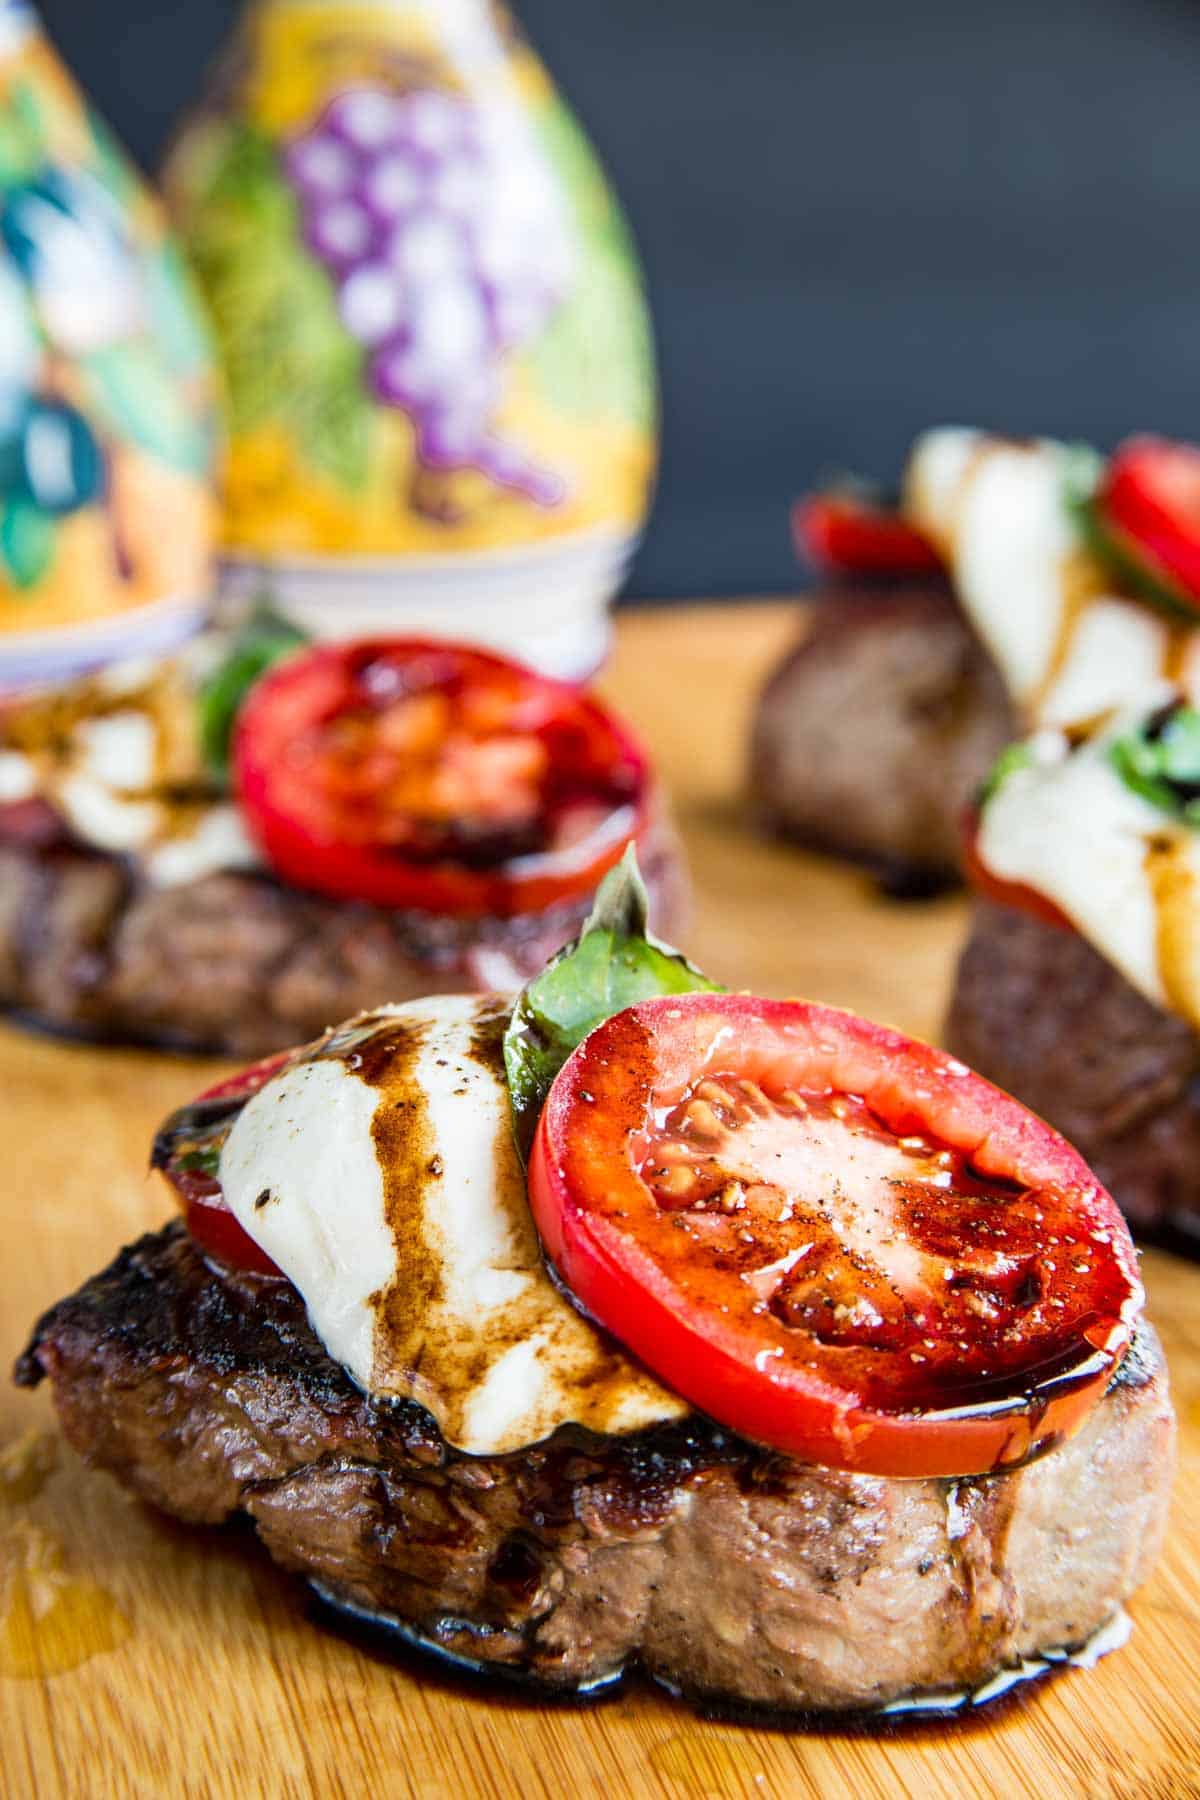 grilled filet mignon steak topped with fresh mozzarella, a basil leaf, a slice of tomato, and a drizzle of balsamic vinegar